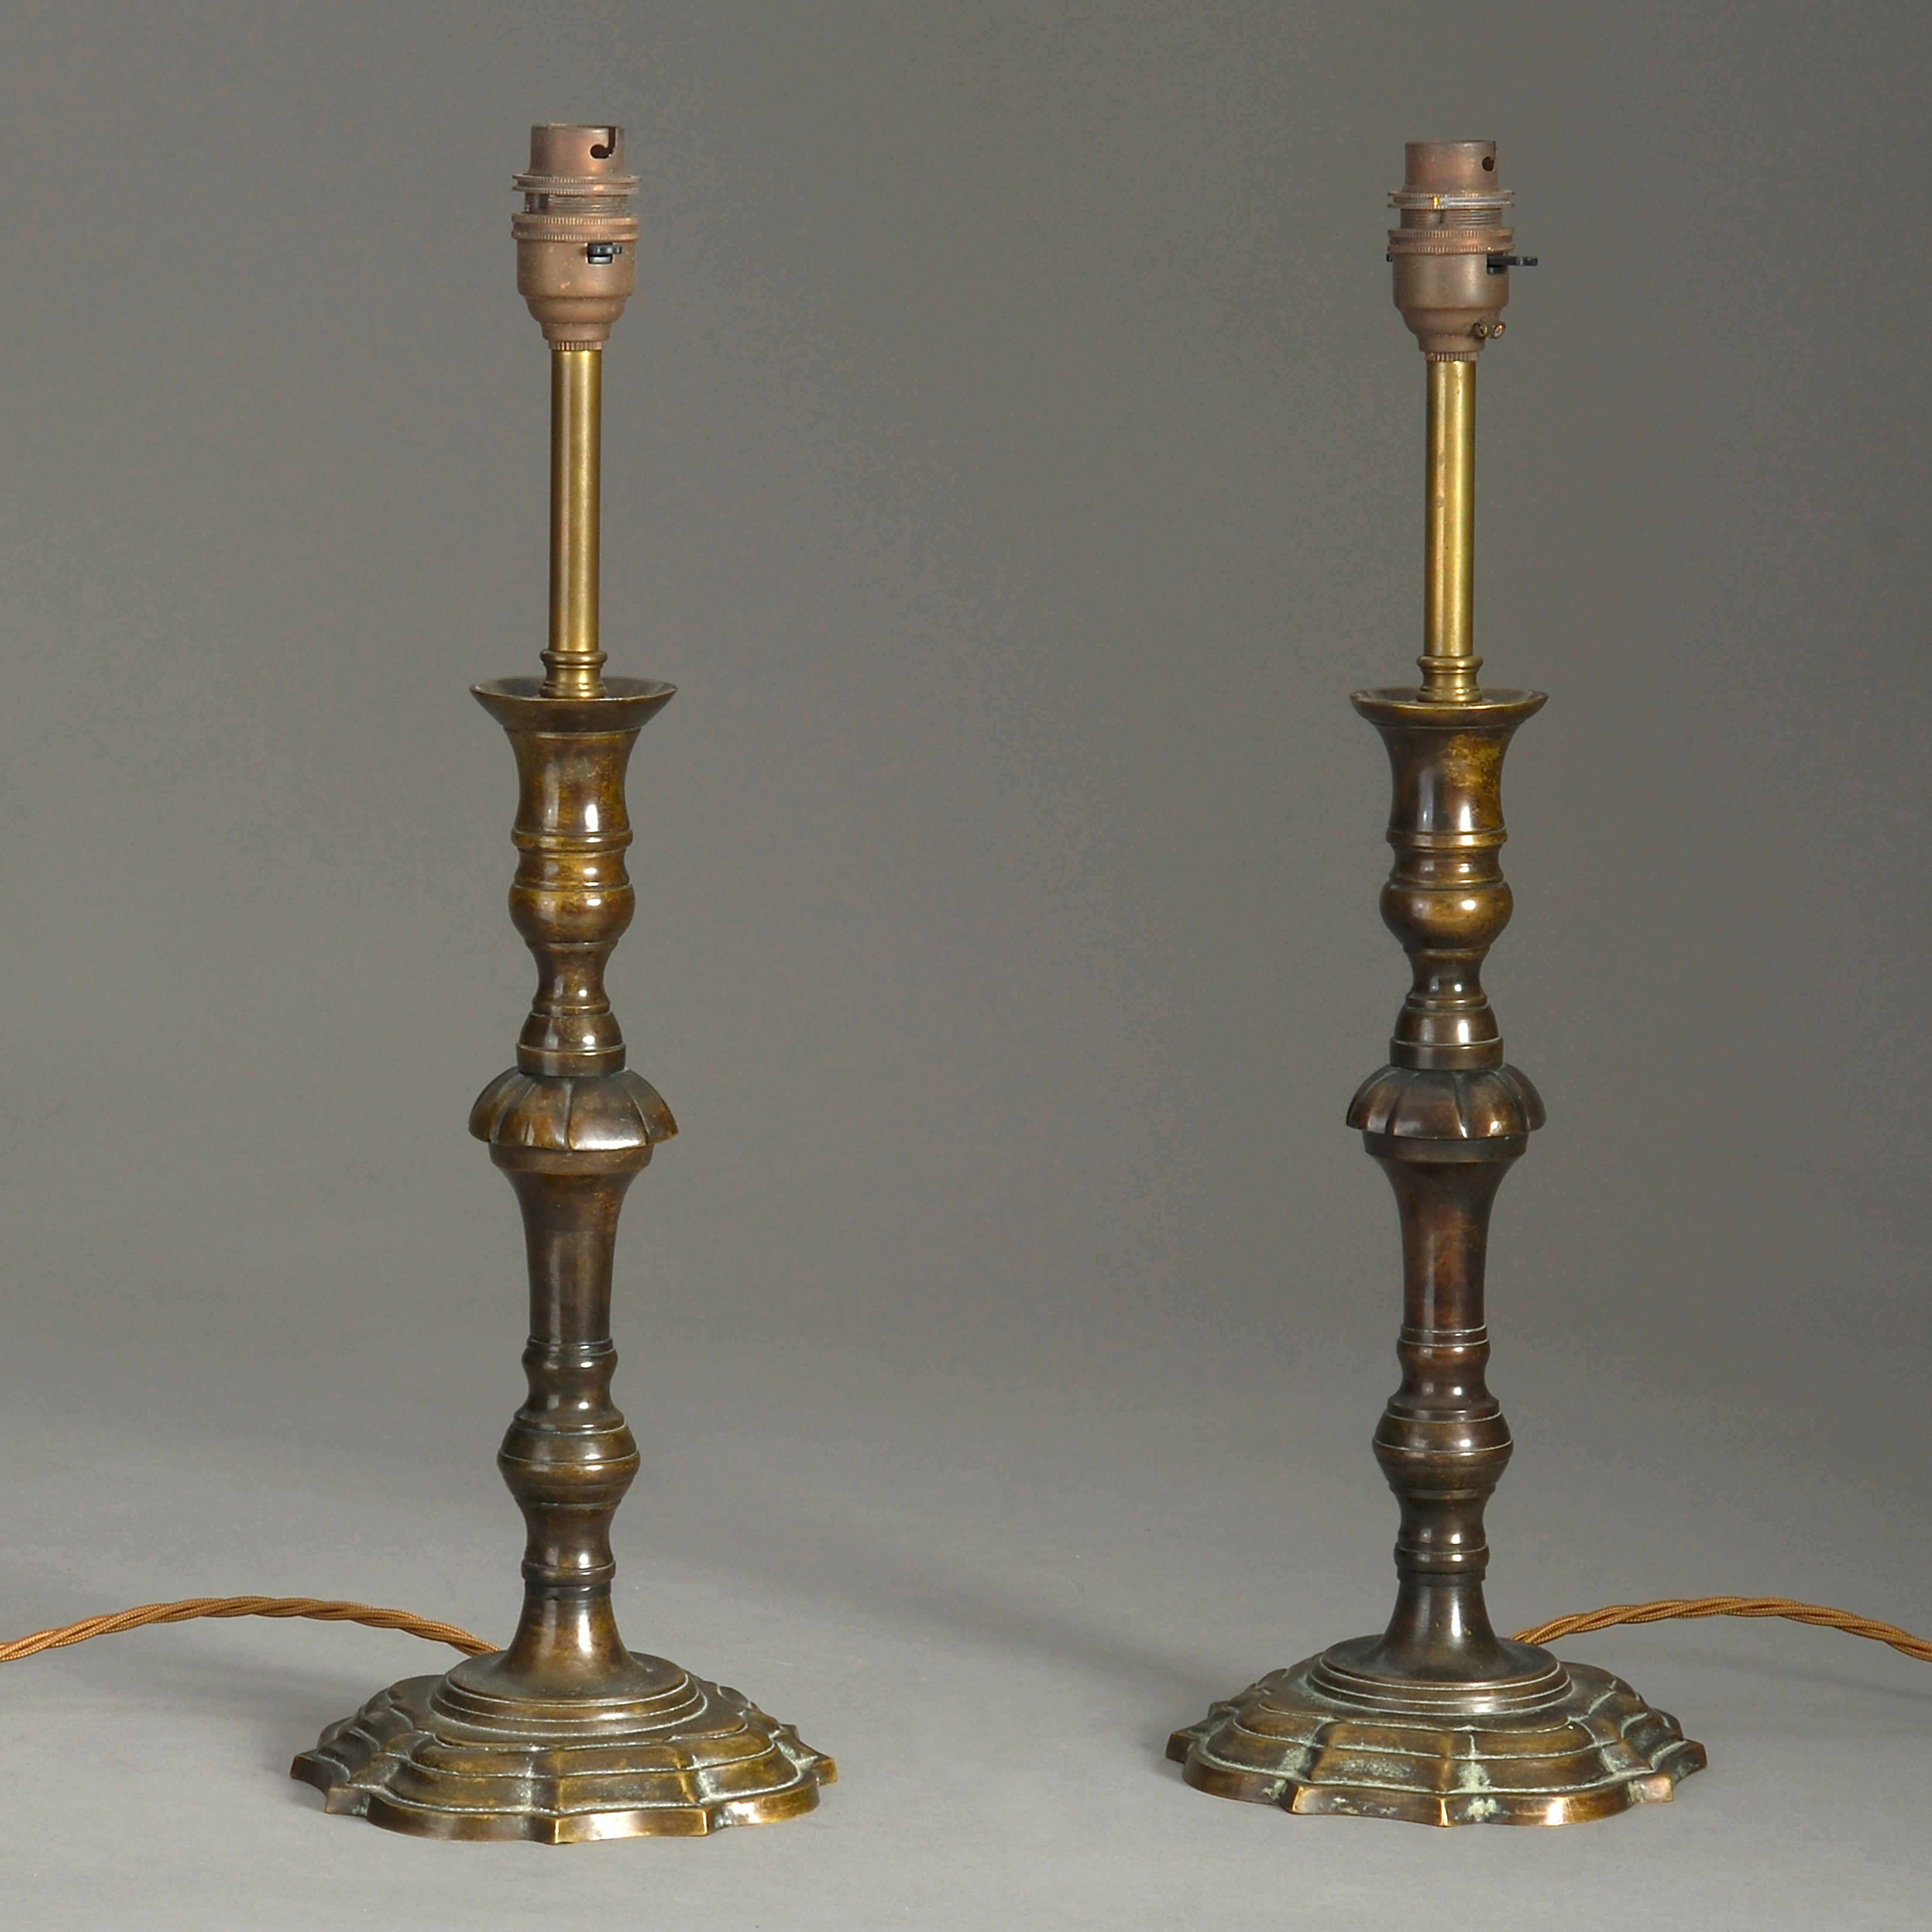 A pair of early 20th century bronzed candlesticks in the George I manner, wired as table lamps.

Wired for electric lighting according to UK safety standards.

These lamps can be rewired for US, EU and Worldwide standards